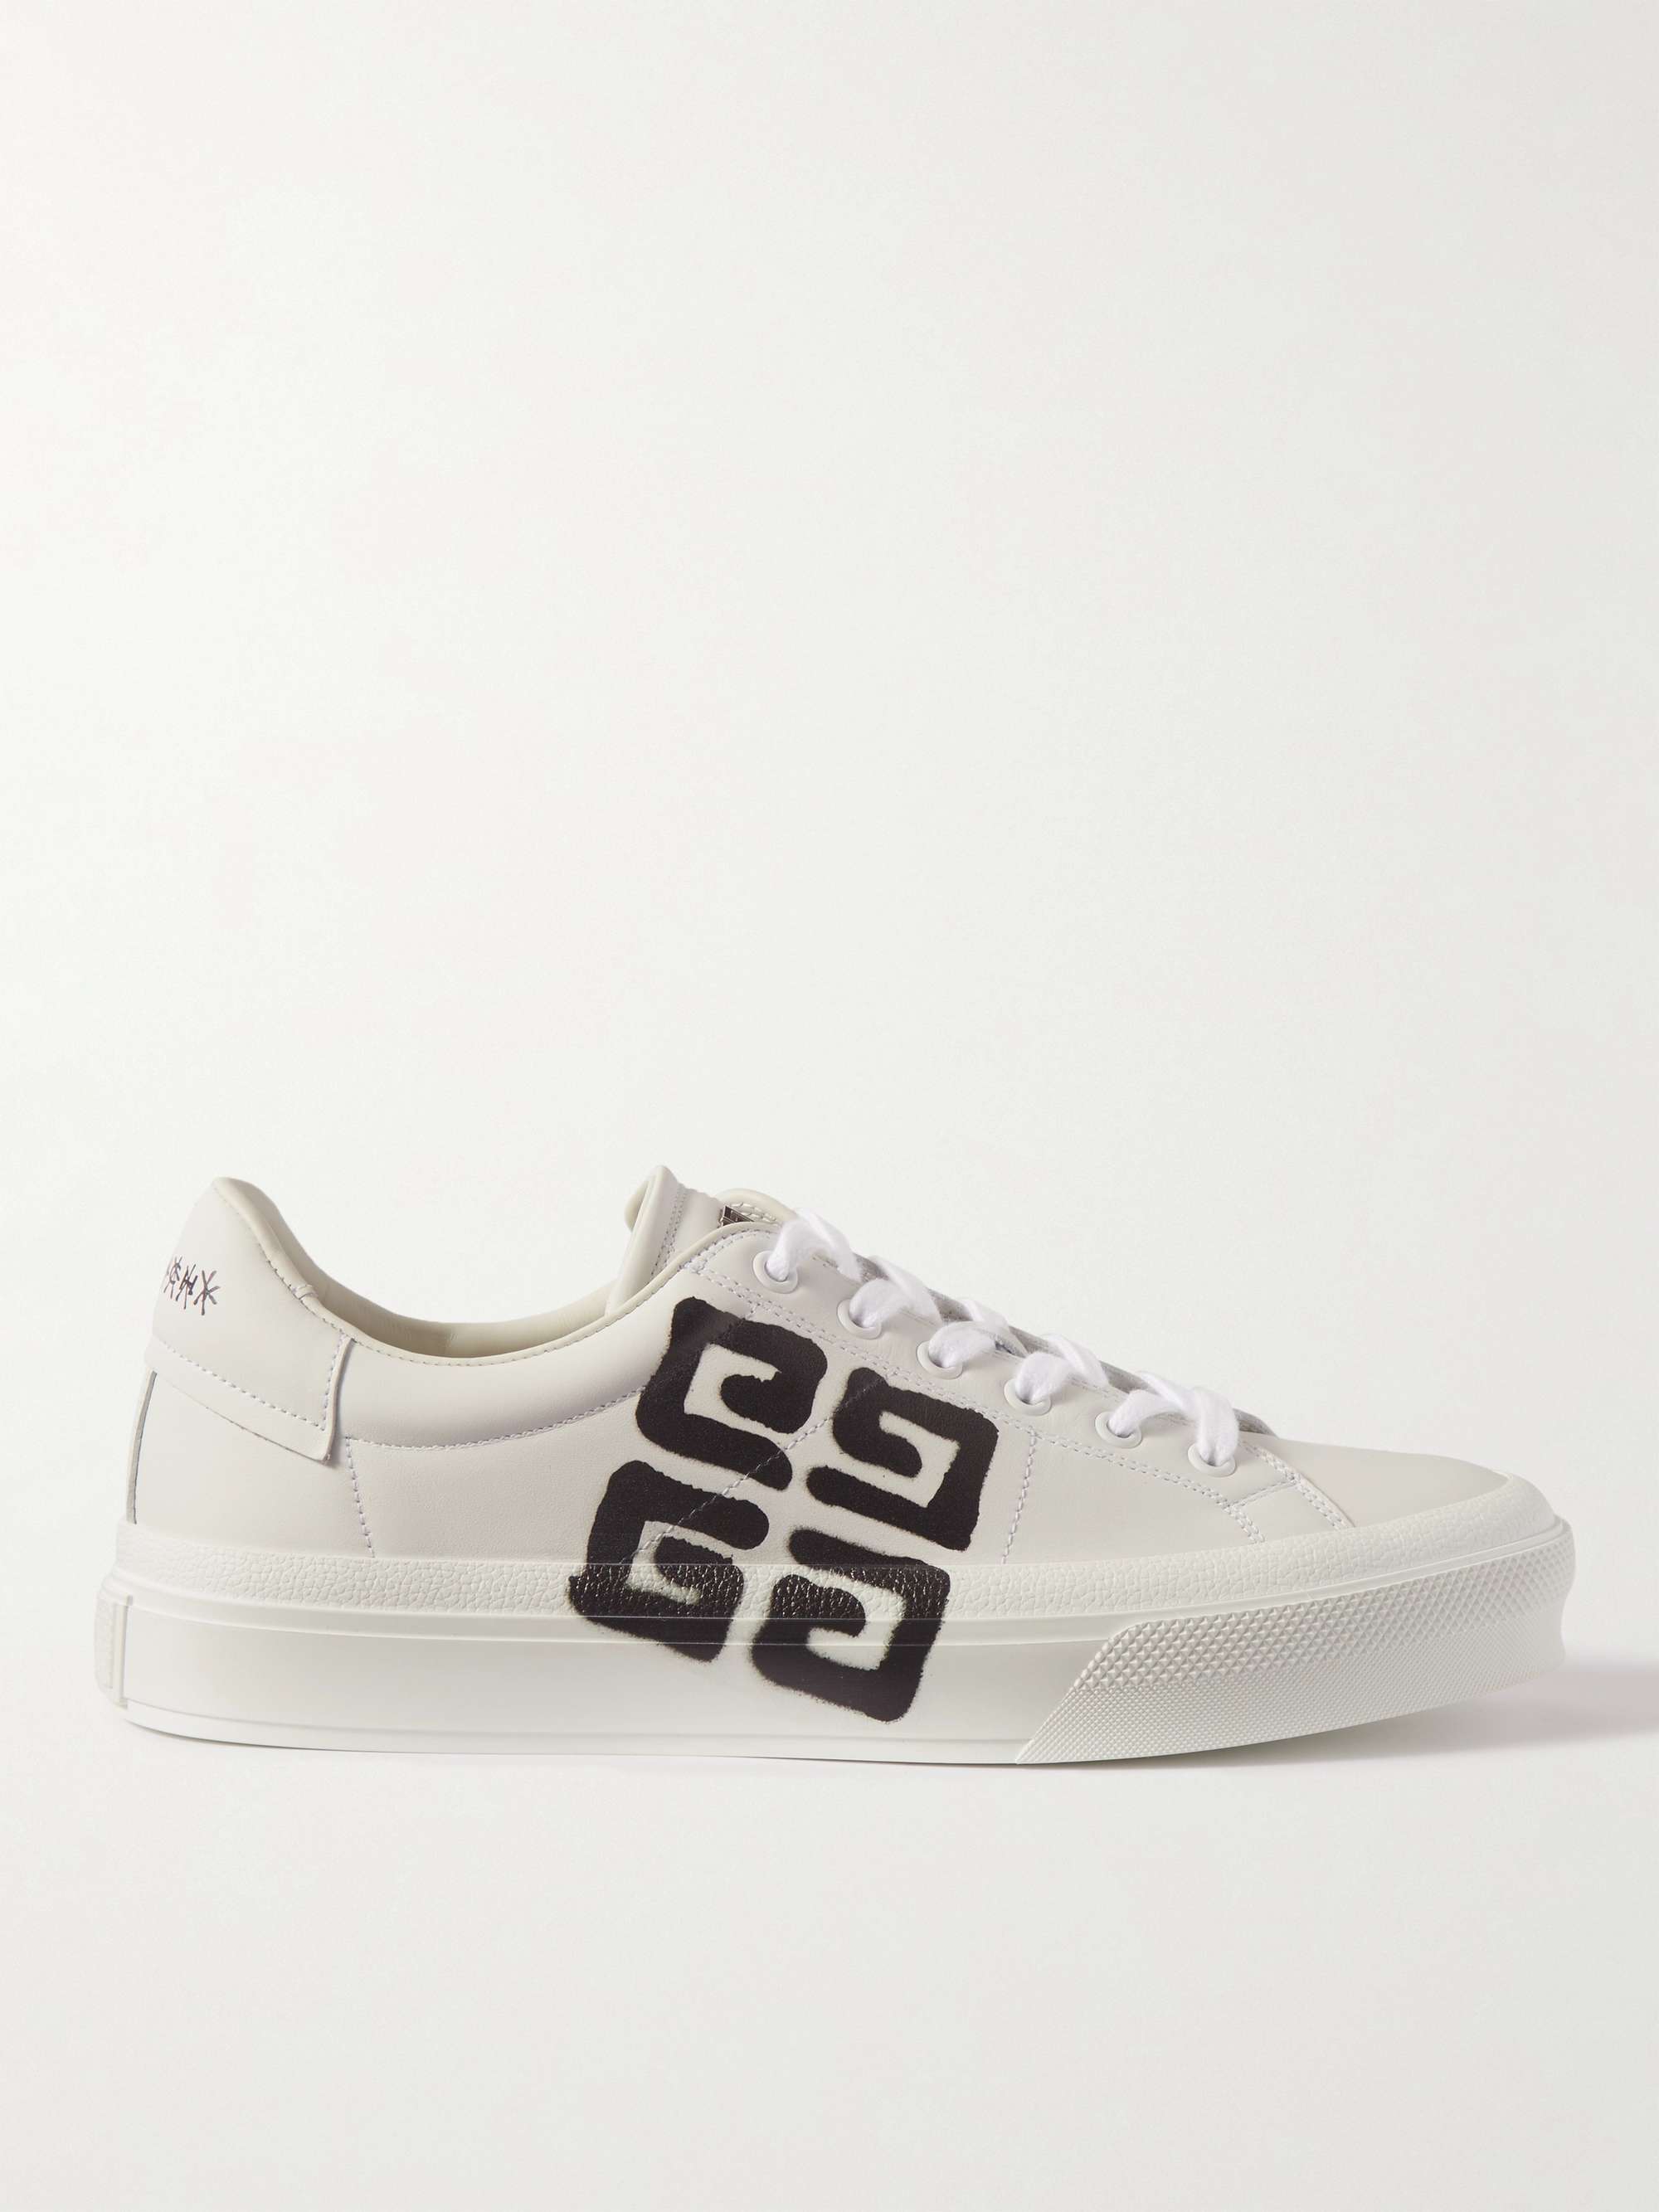 White + Chito Giv 1 Logo-Print Leather Sneakers | GIVENCHY | MR PORTER